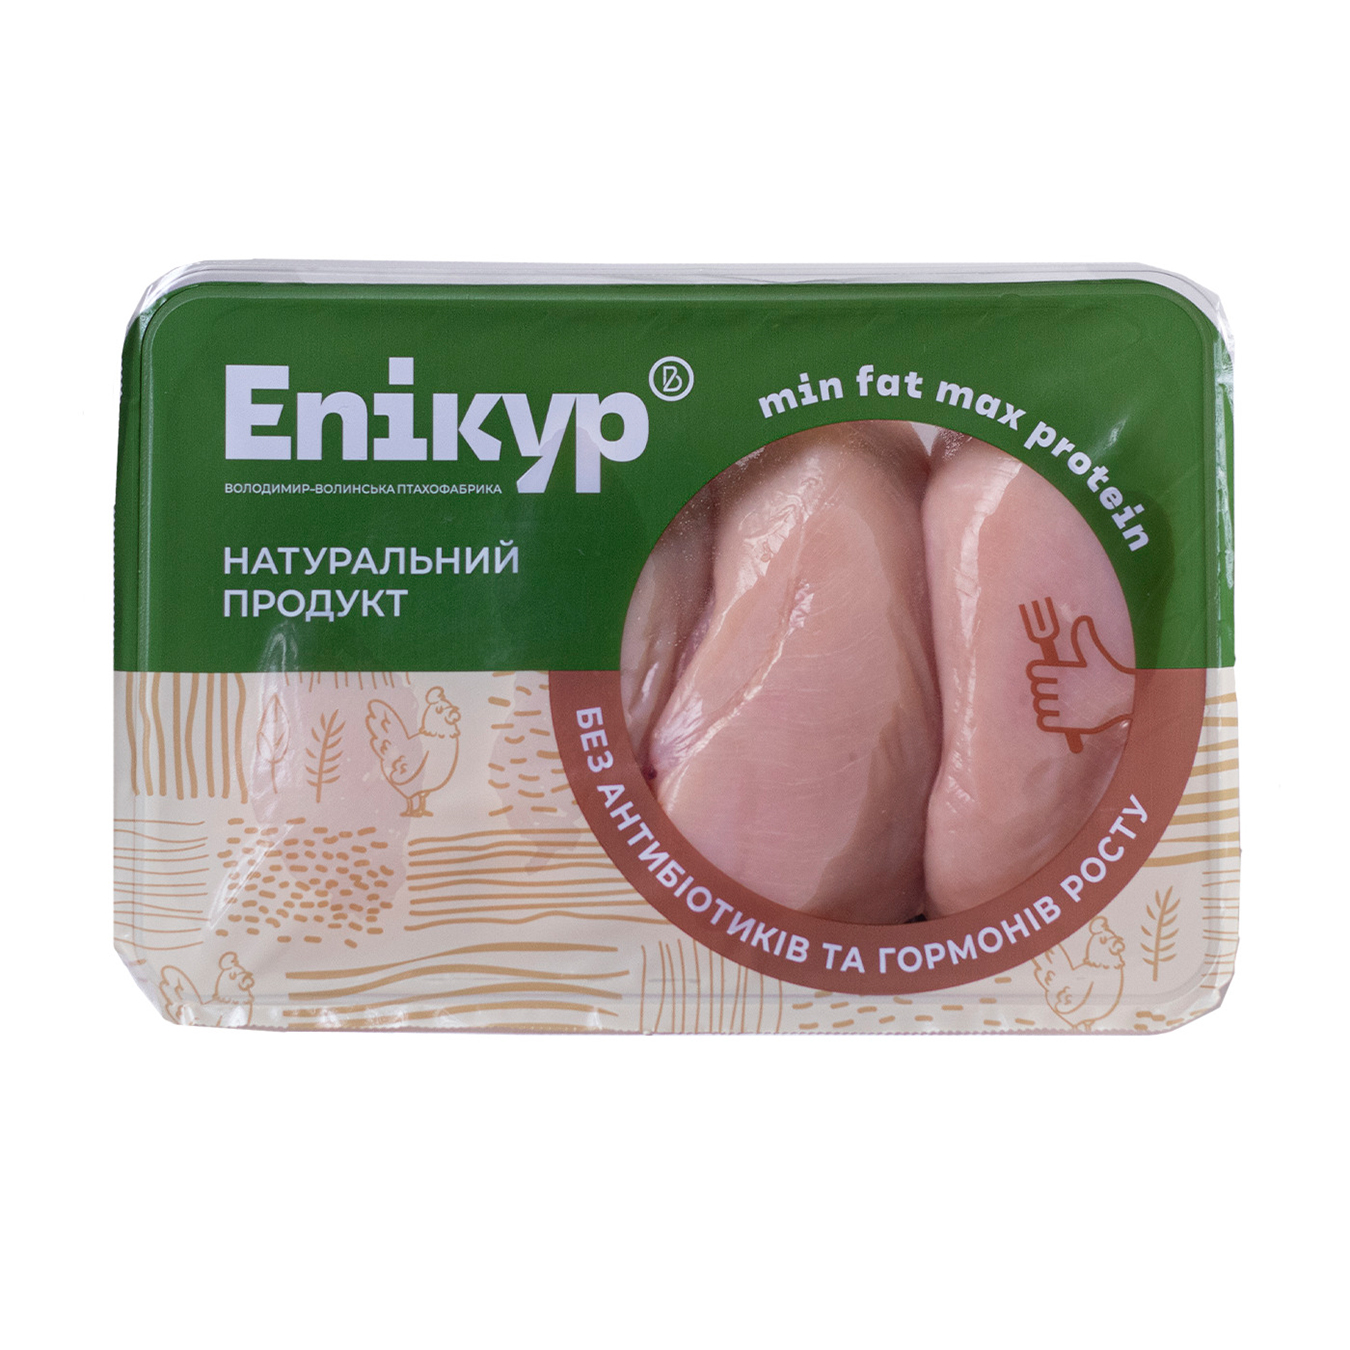 Epicure fillet of broiler chicken chilled 850-1100 grams per package